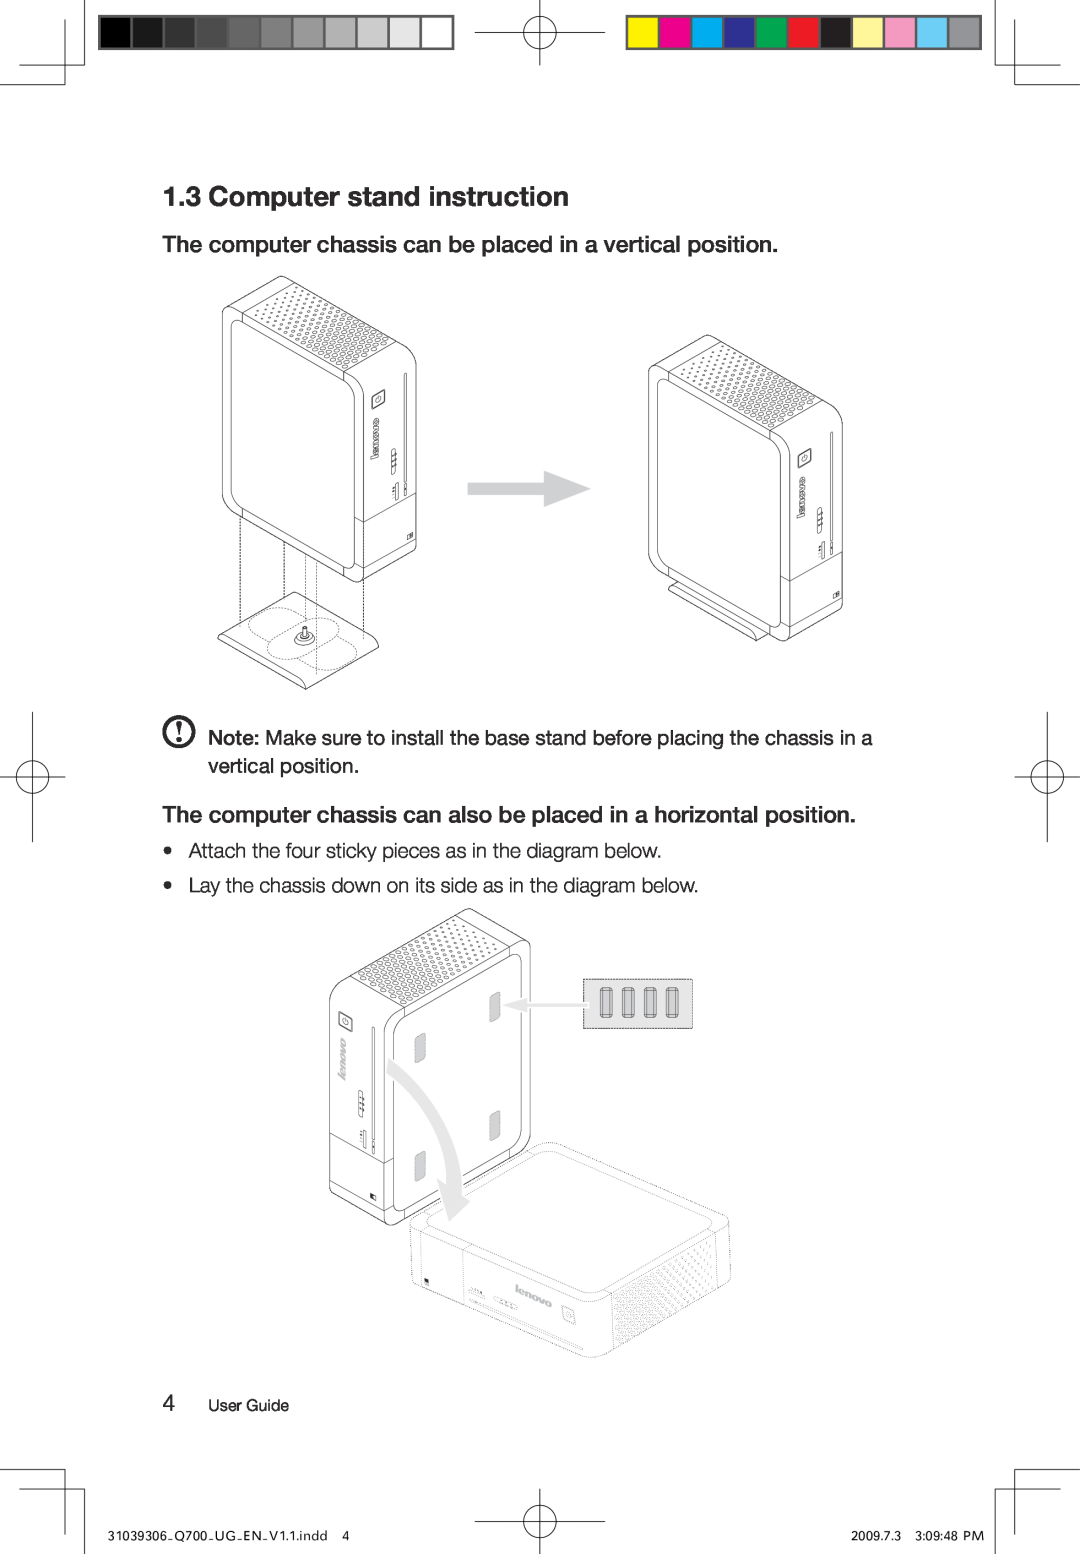 Lenovo Q700 manual Computer stand instruction, The computer chassis can be placed in a vertical position,  User Guide 